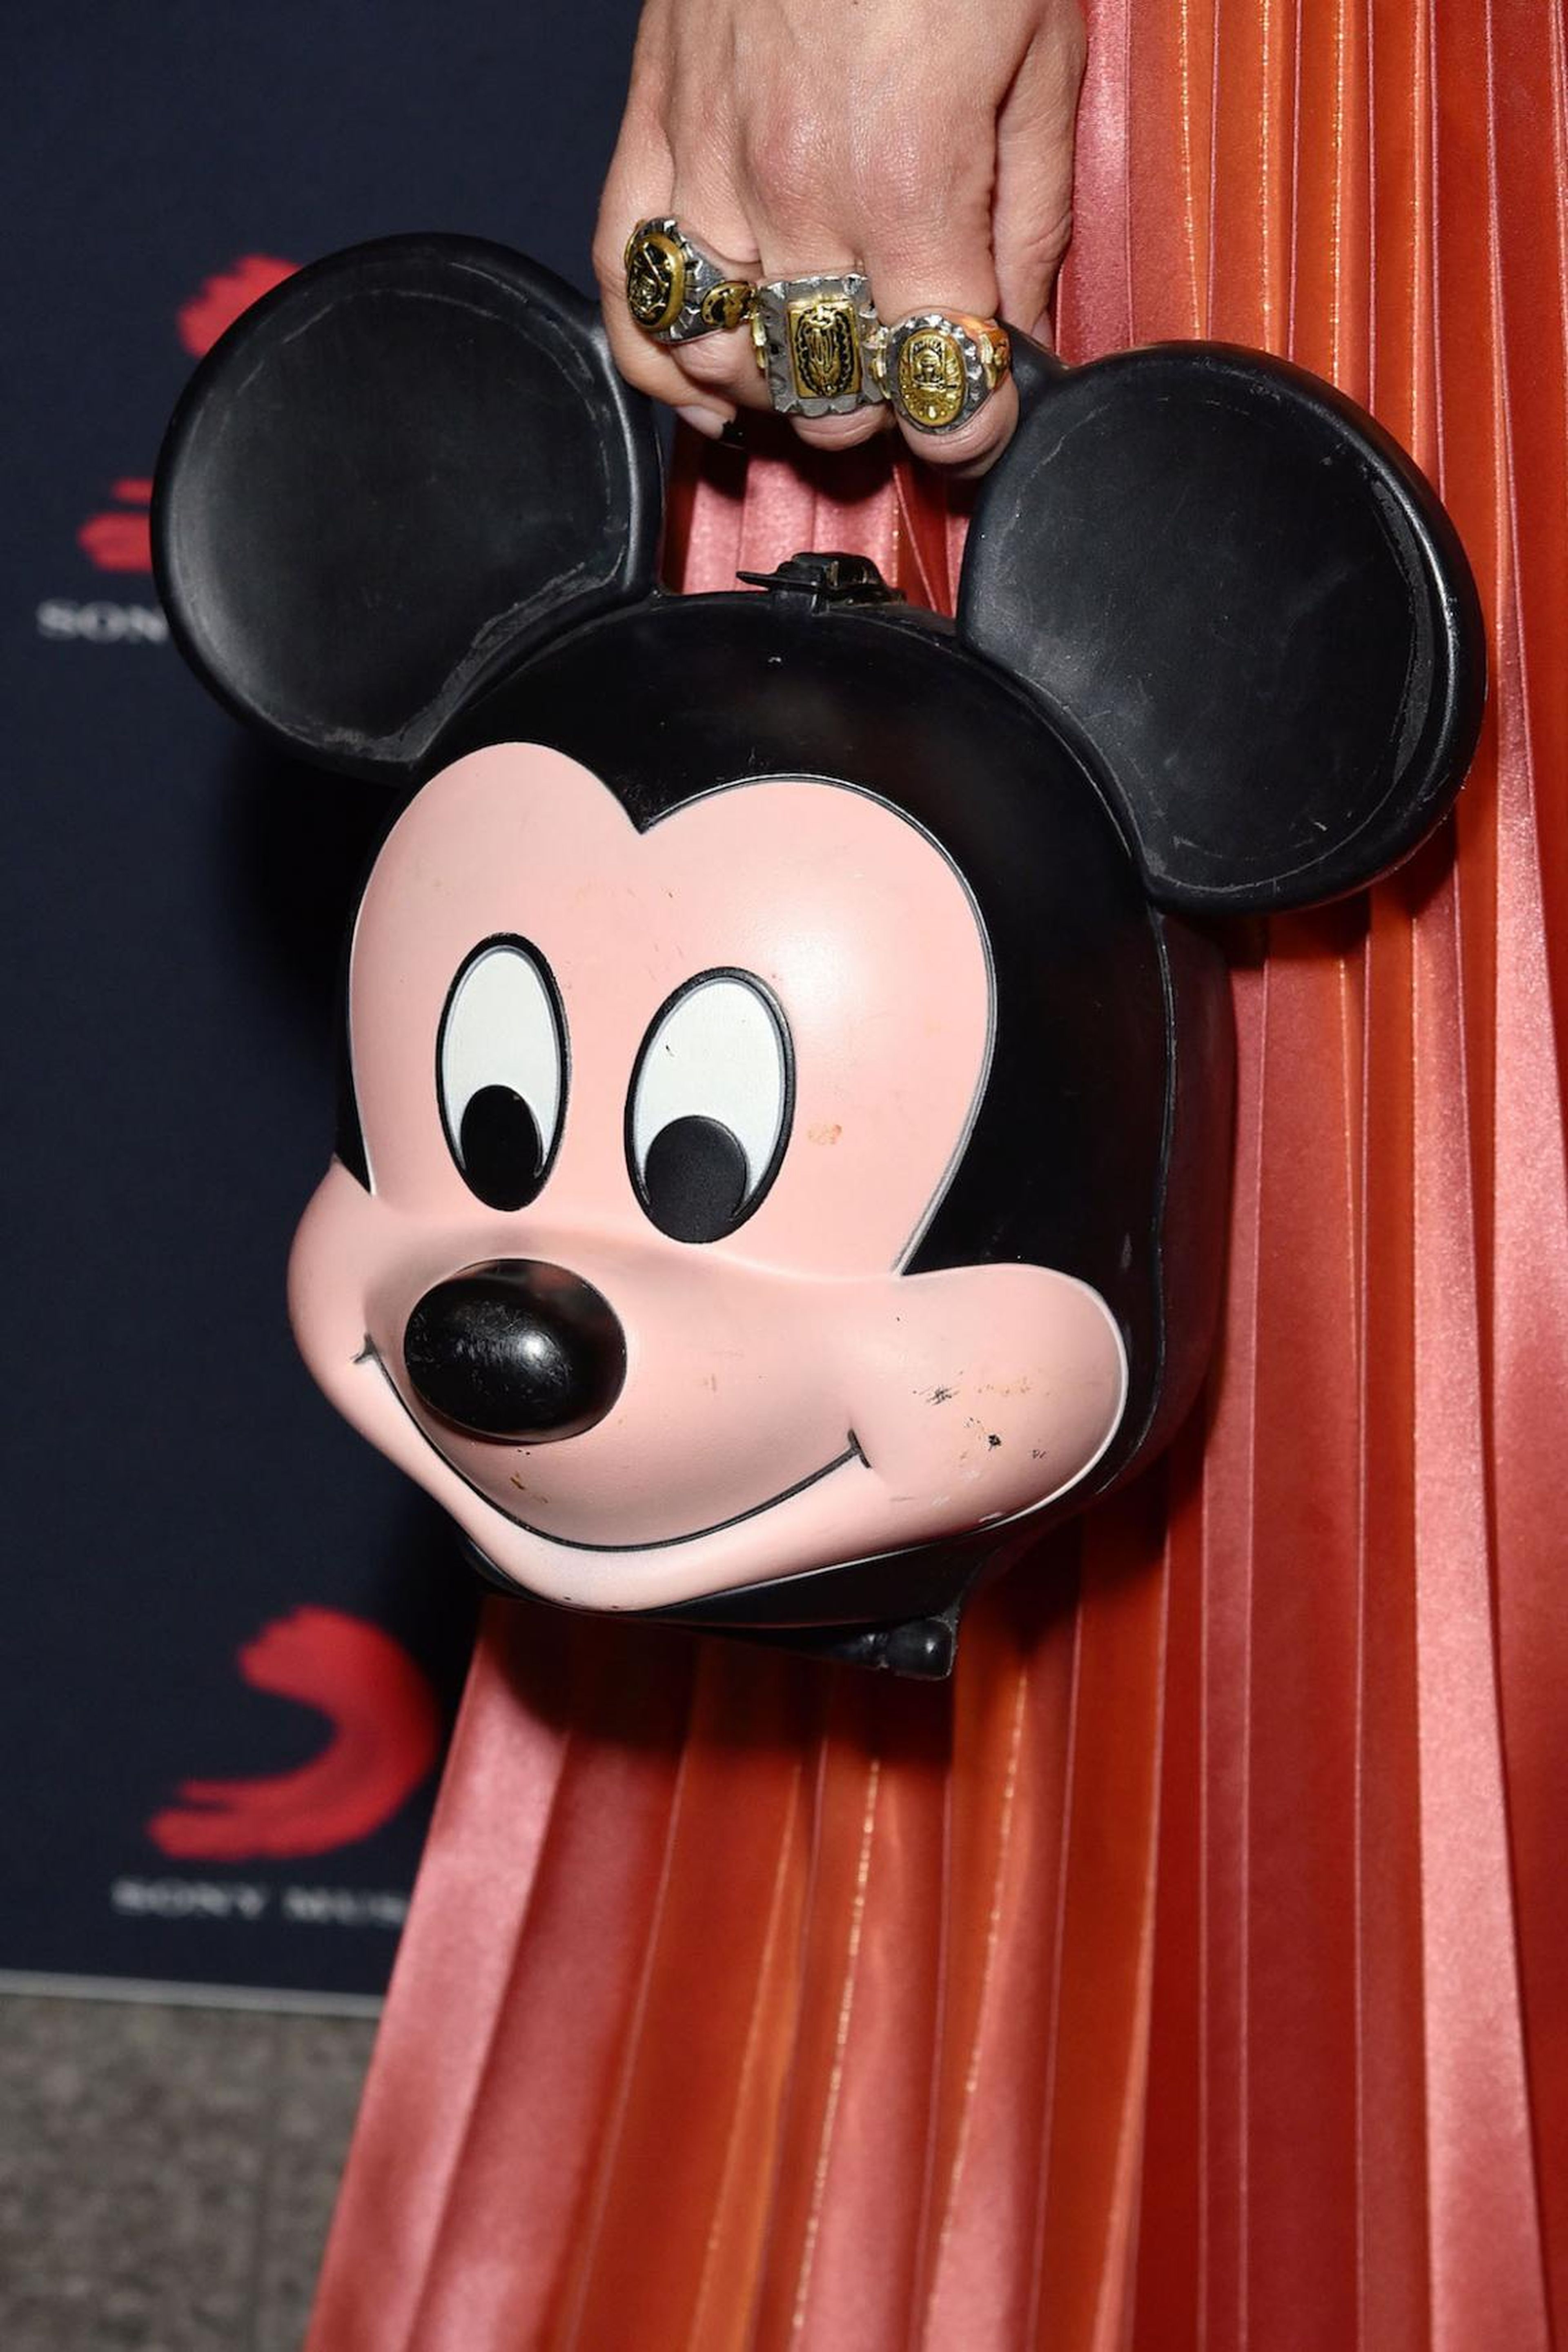 Singer Paloma Faith appeared to wear the Gucci Mickey Mouse bag to the after party of the BRIT Awards in February.